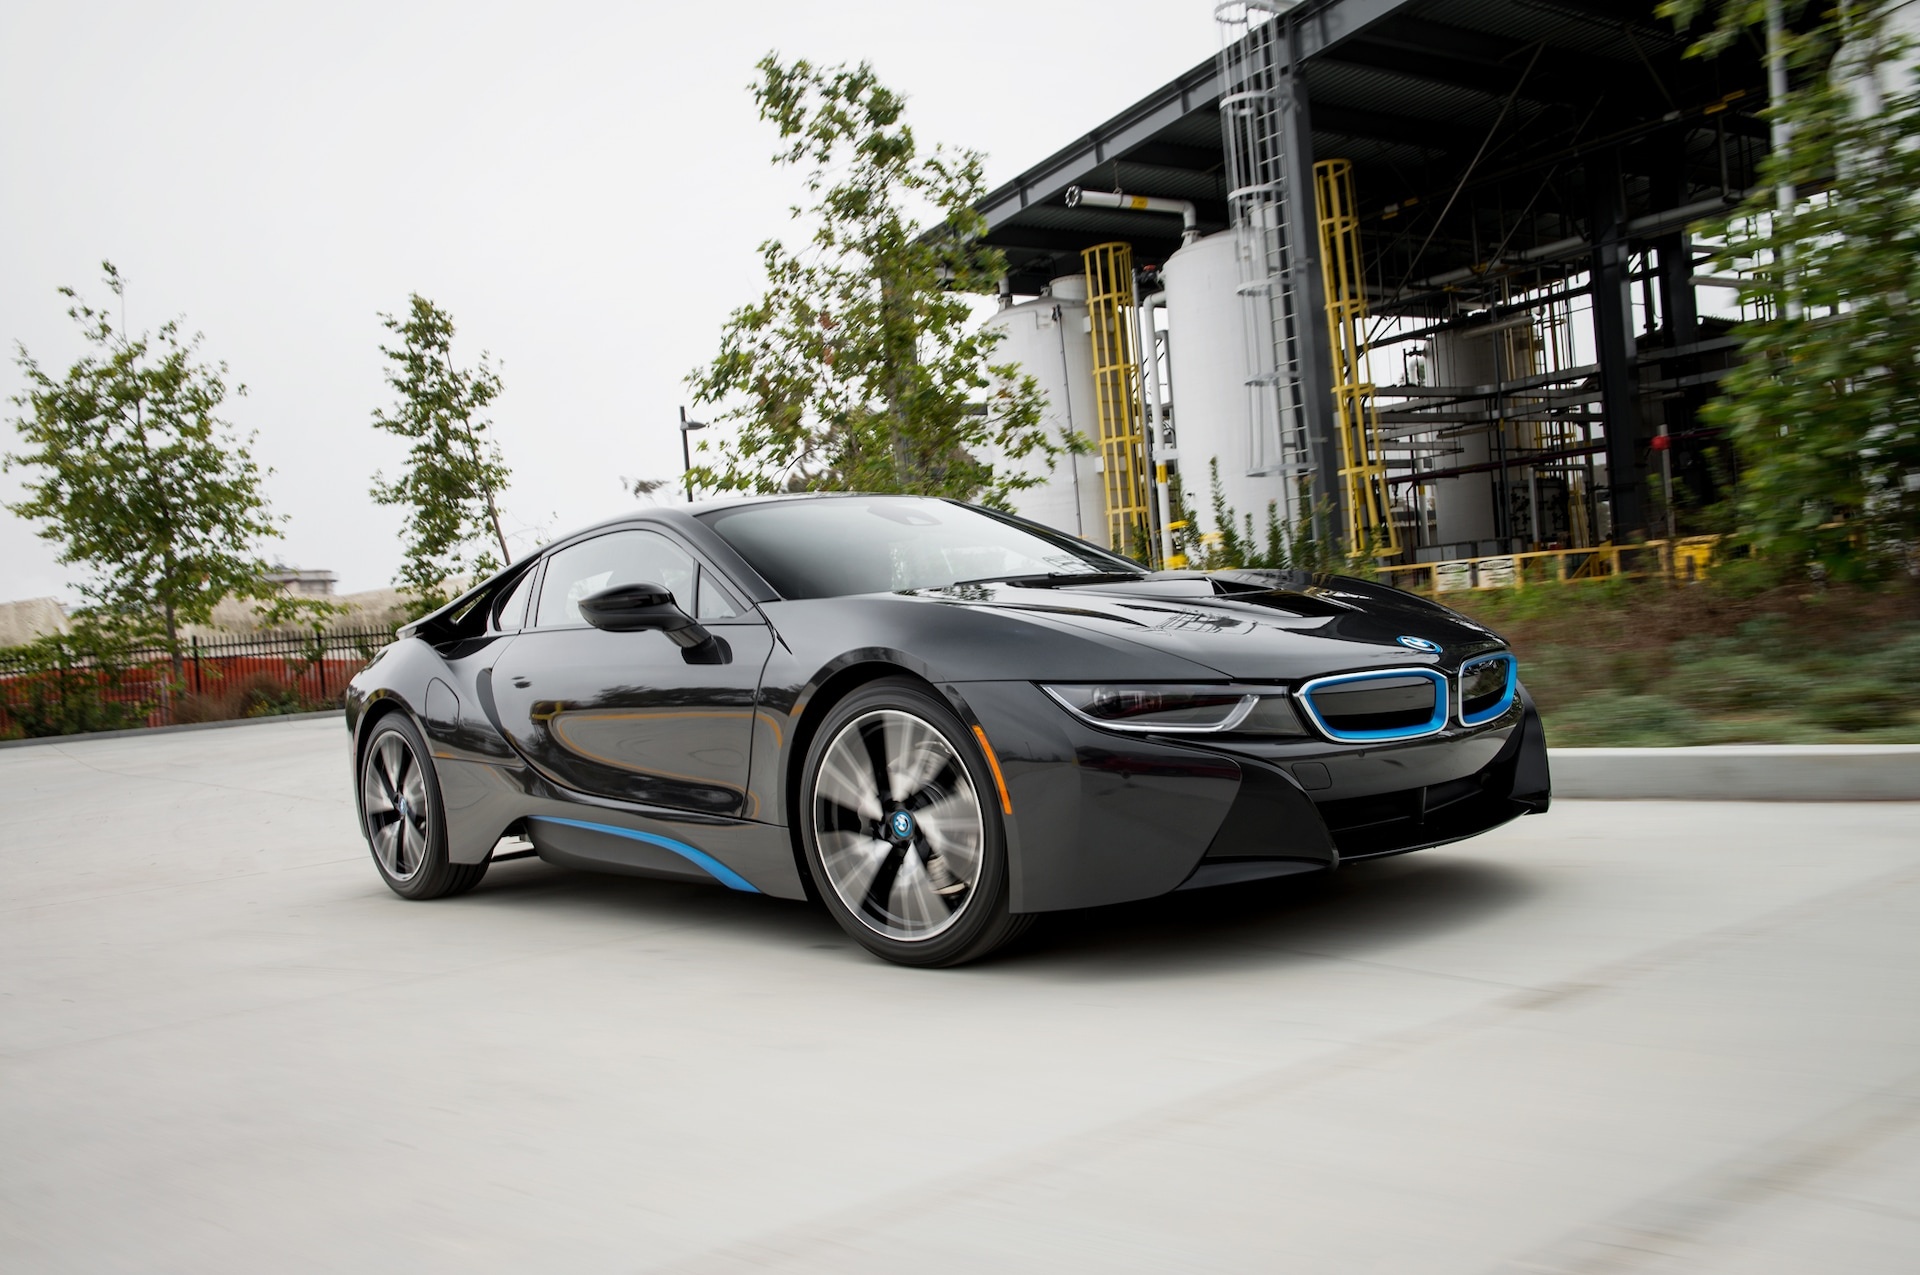 Masterpiece in 2014, BMW i8's debut, Engineering marvel, Speed and style, Iconic sports car, 1920x1280 HD Desktop